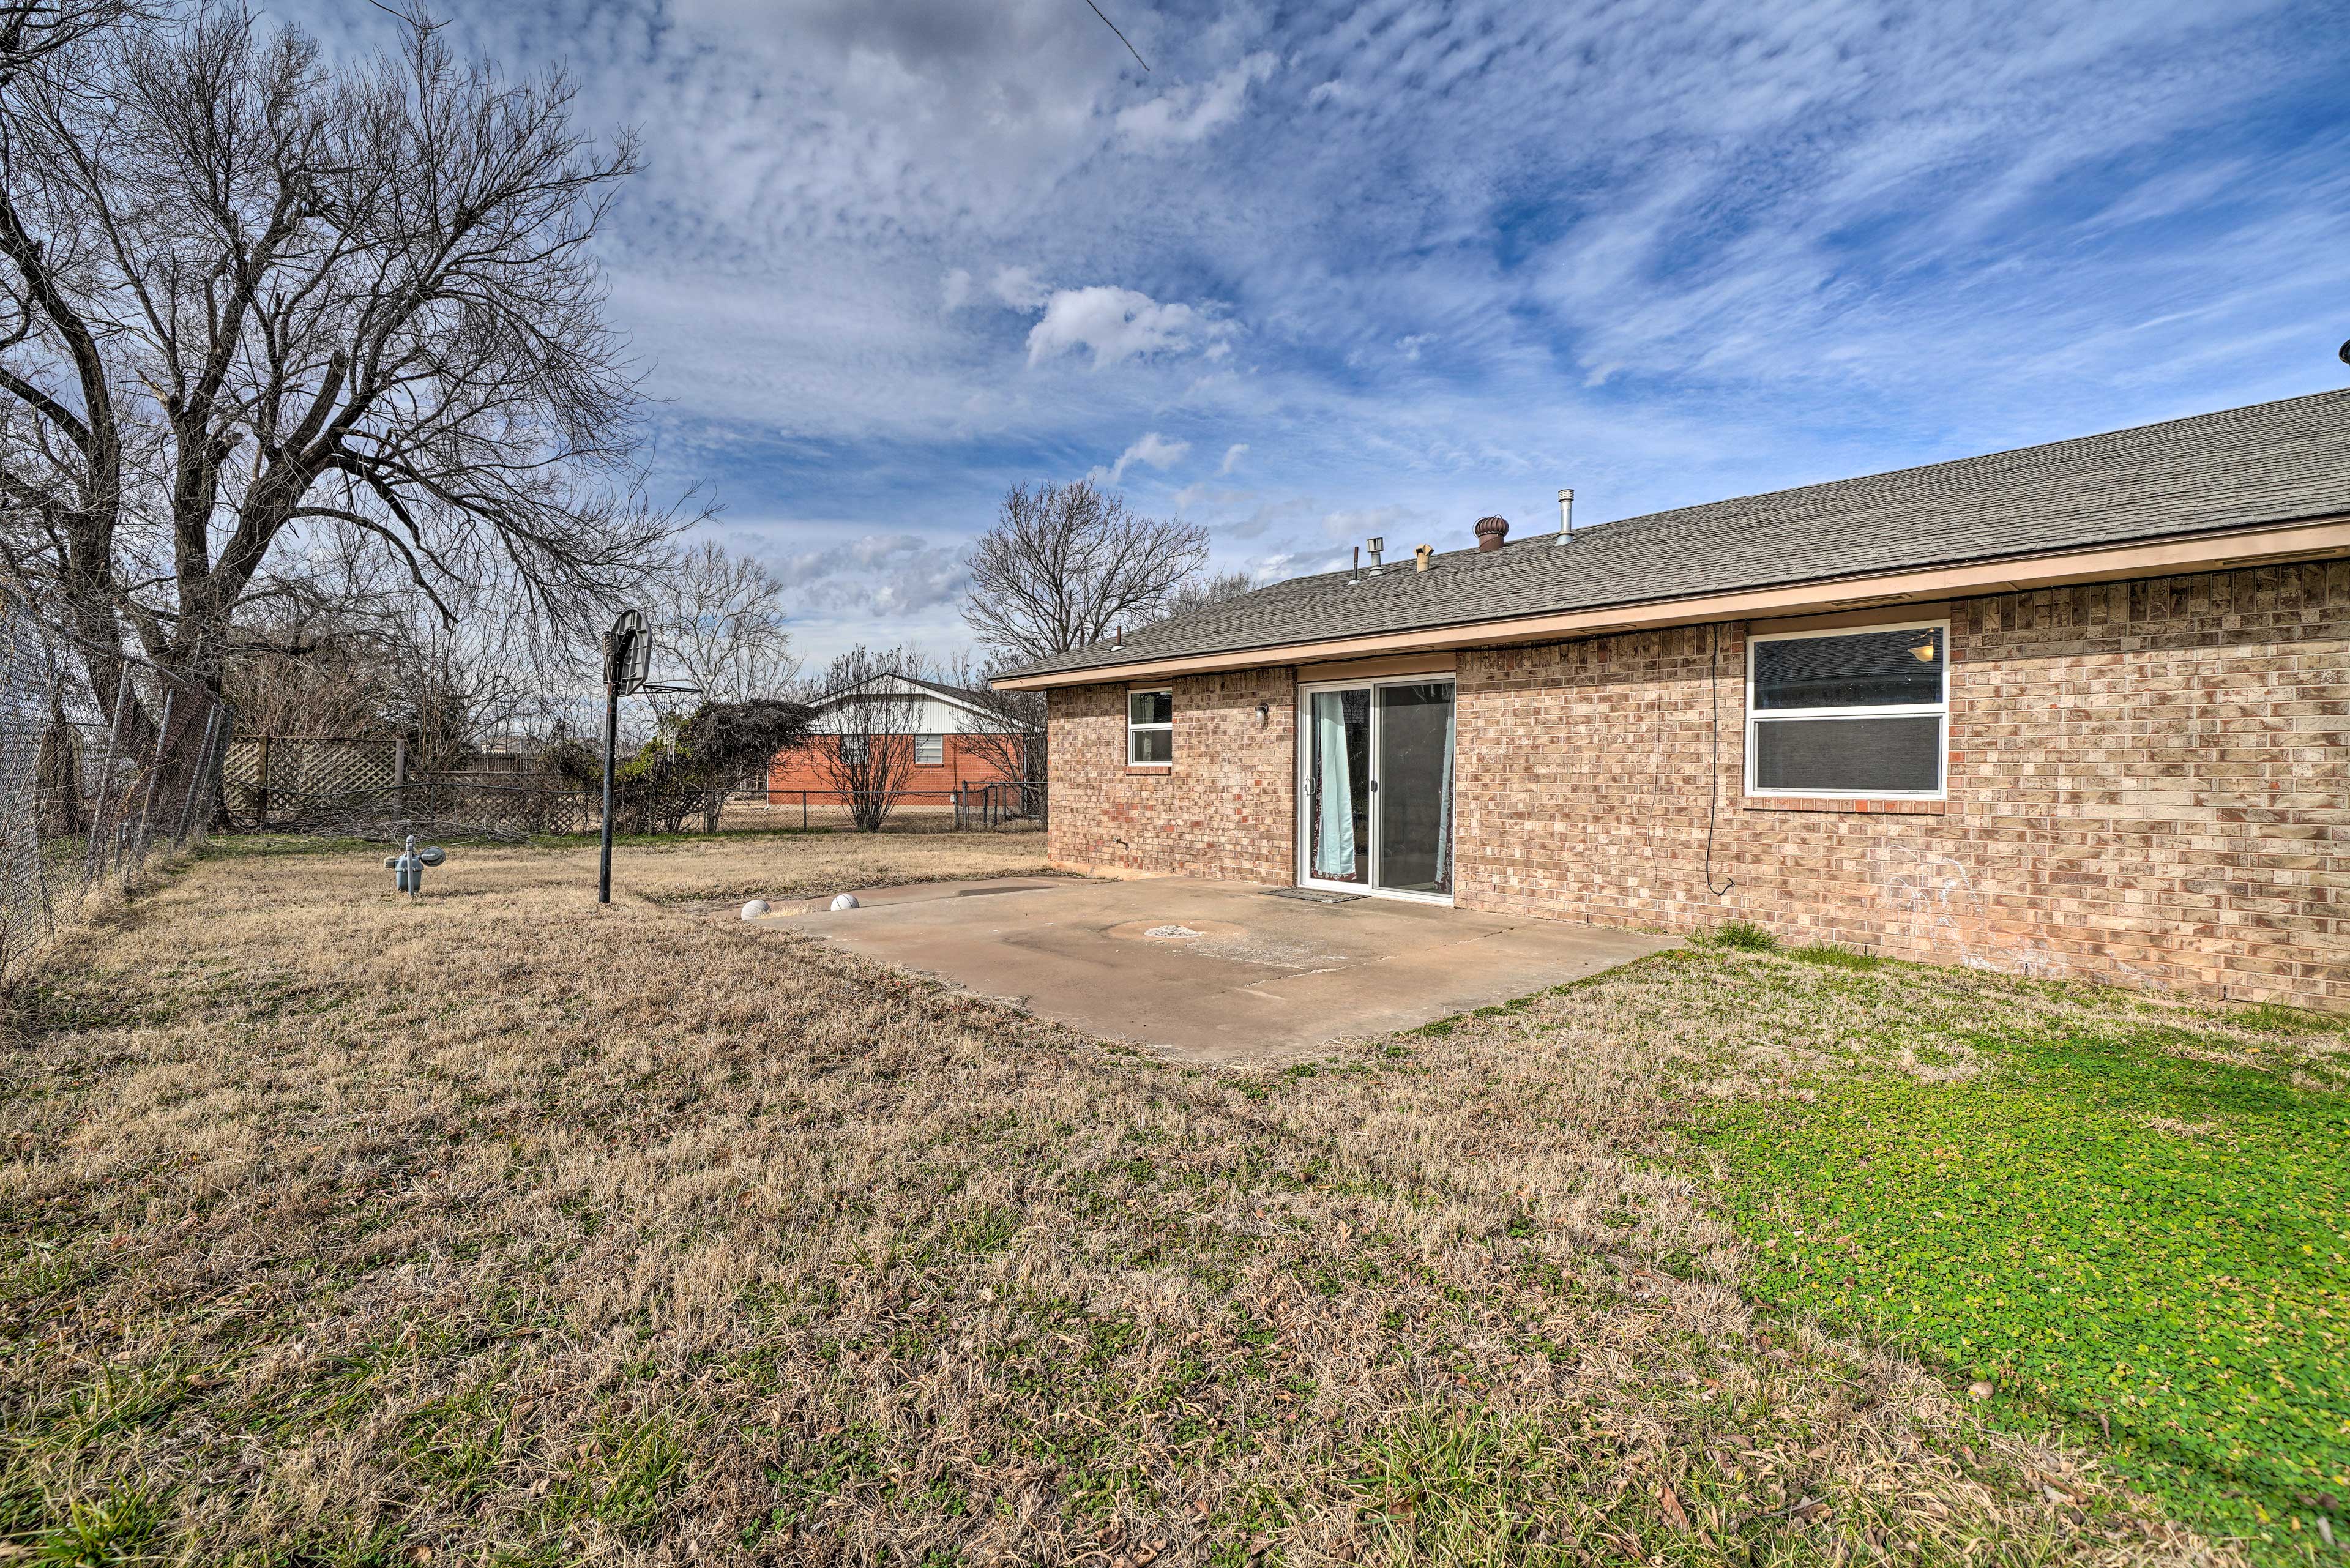 This 4-bedroom, 1.5 bath vacation rental is located in Oklahoma City!